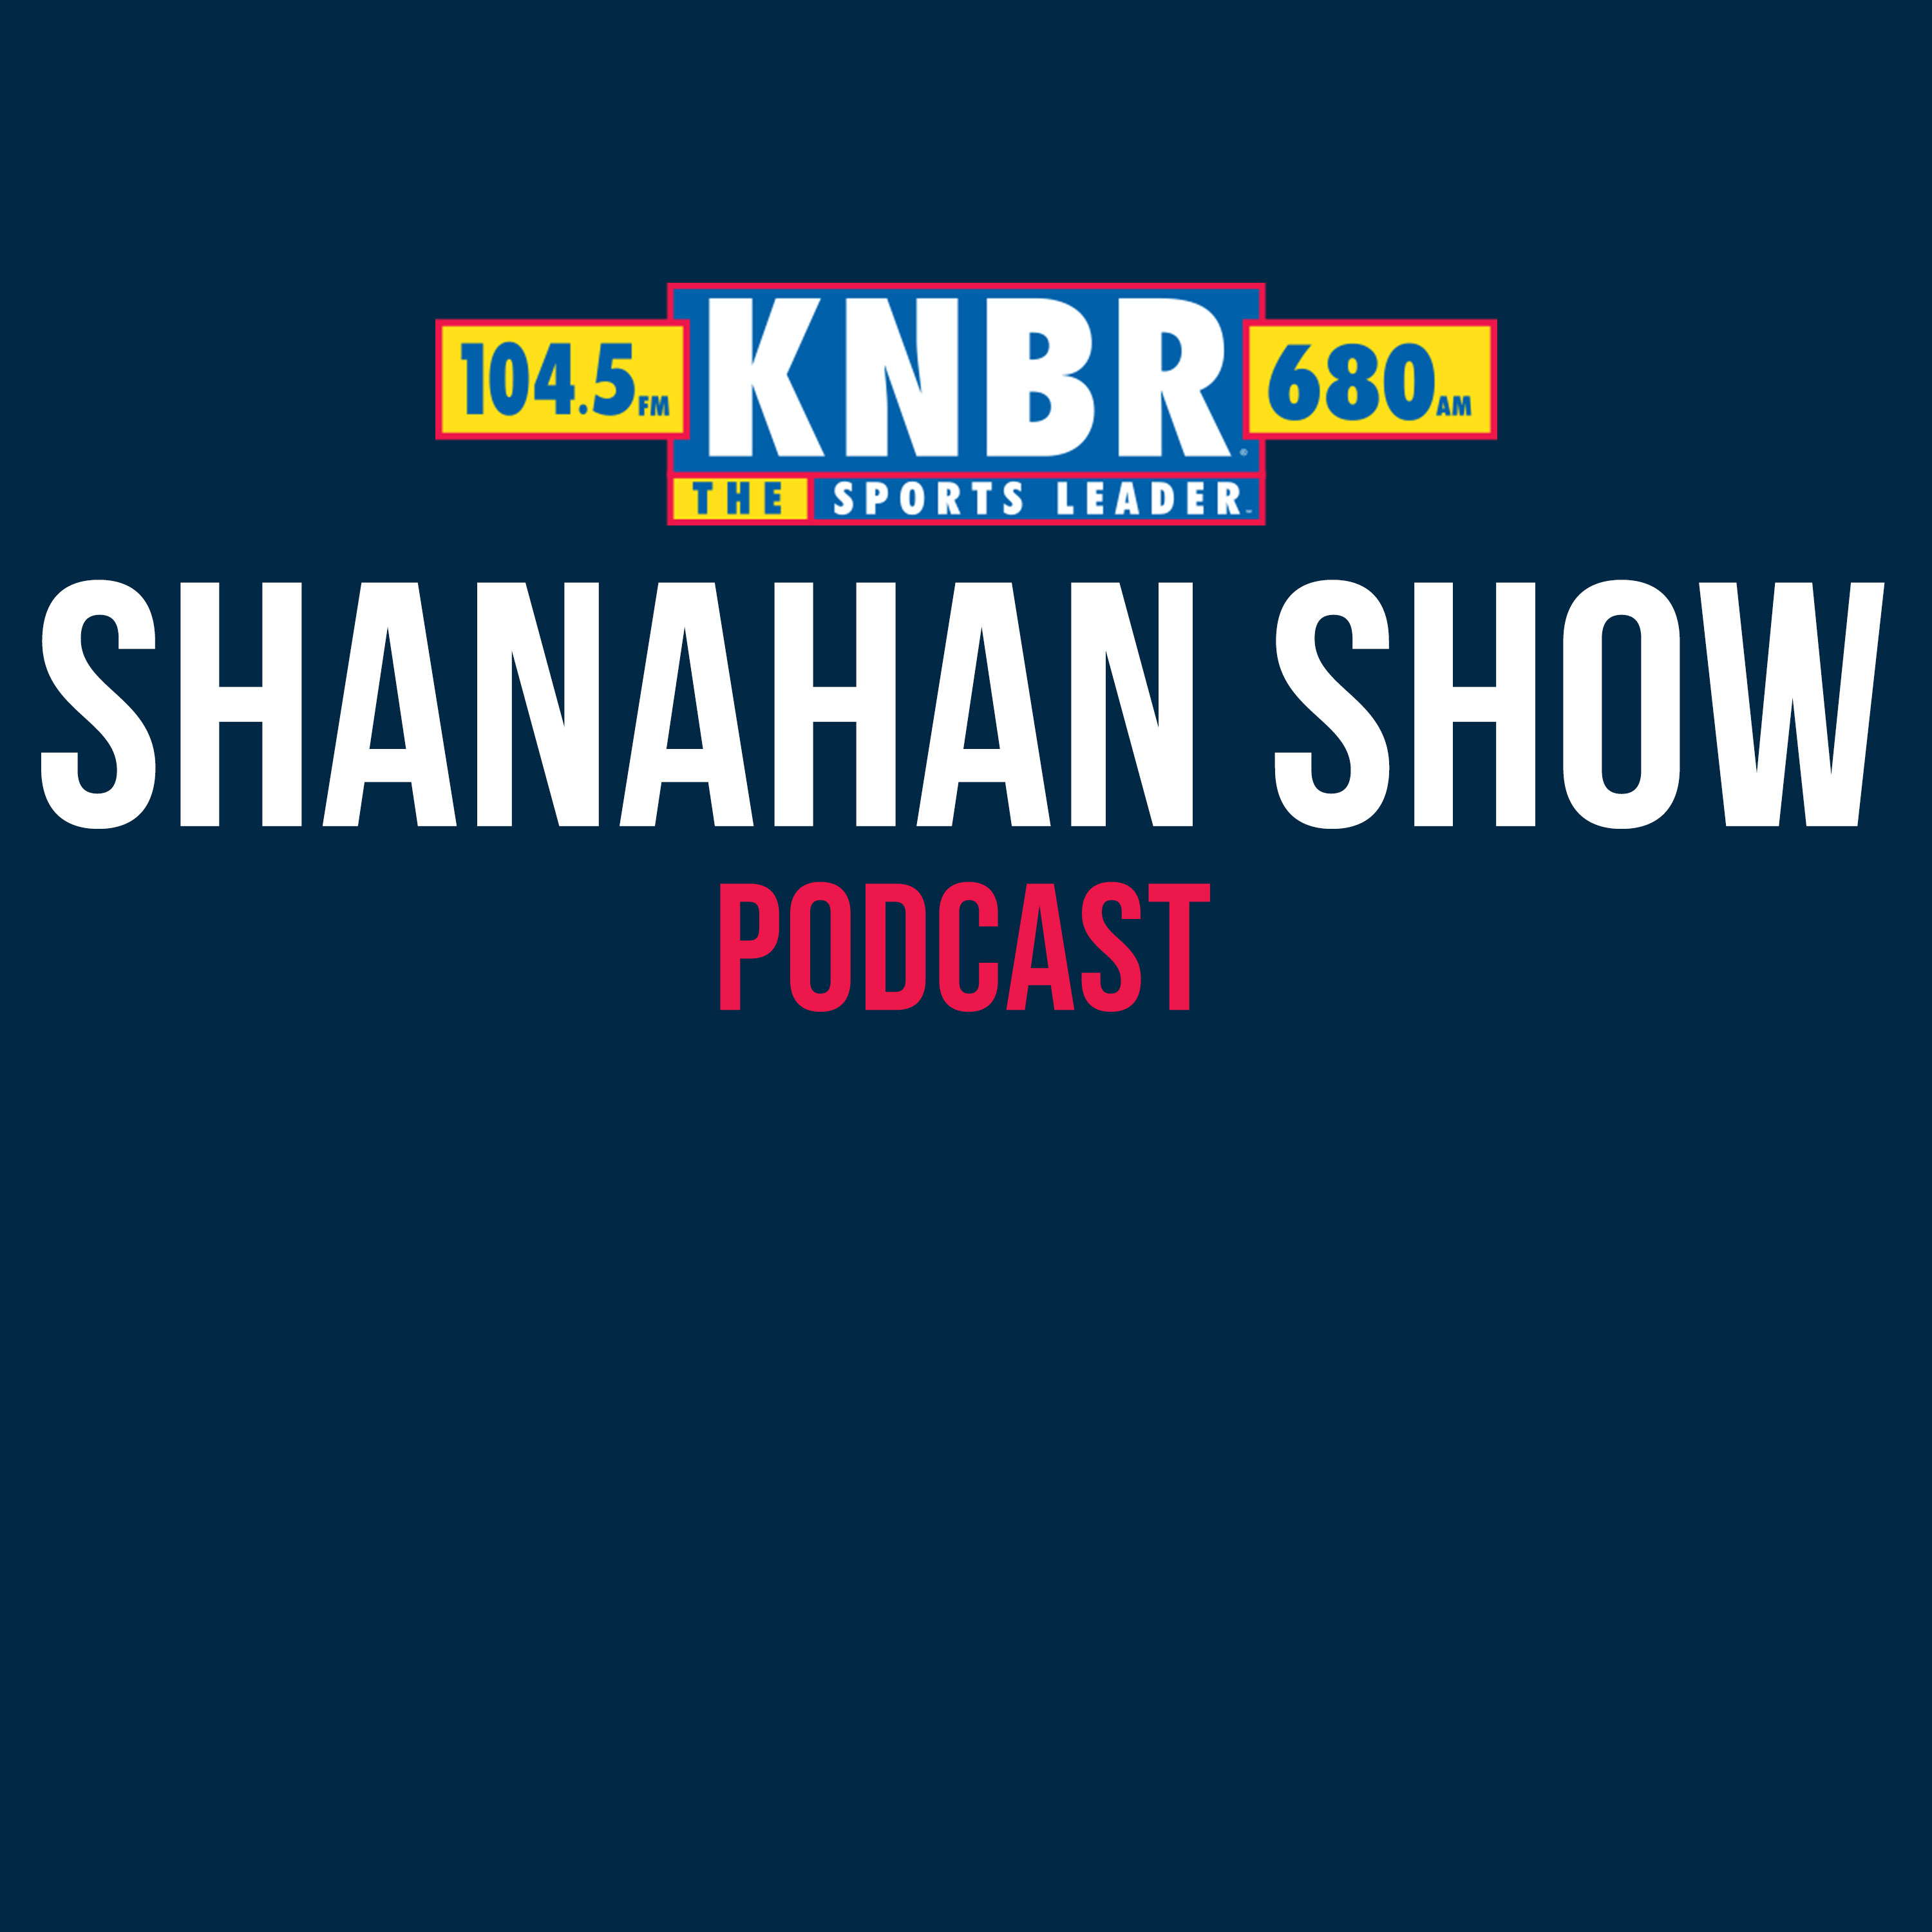 10-1  Kyle Shanahan joins the Murph & Mac Show to talk about George Kittle's and Elijah Mitchell's injuries, the rumors about reaching out to Tom Brady, and a this weekends divisional game against the Seattle Seahawks!